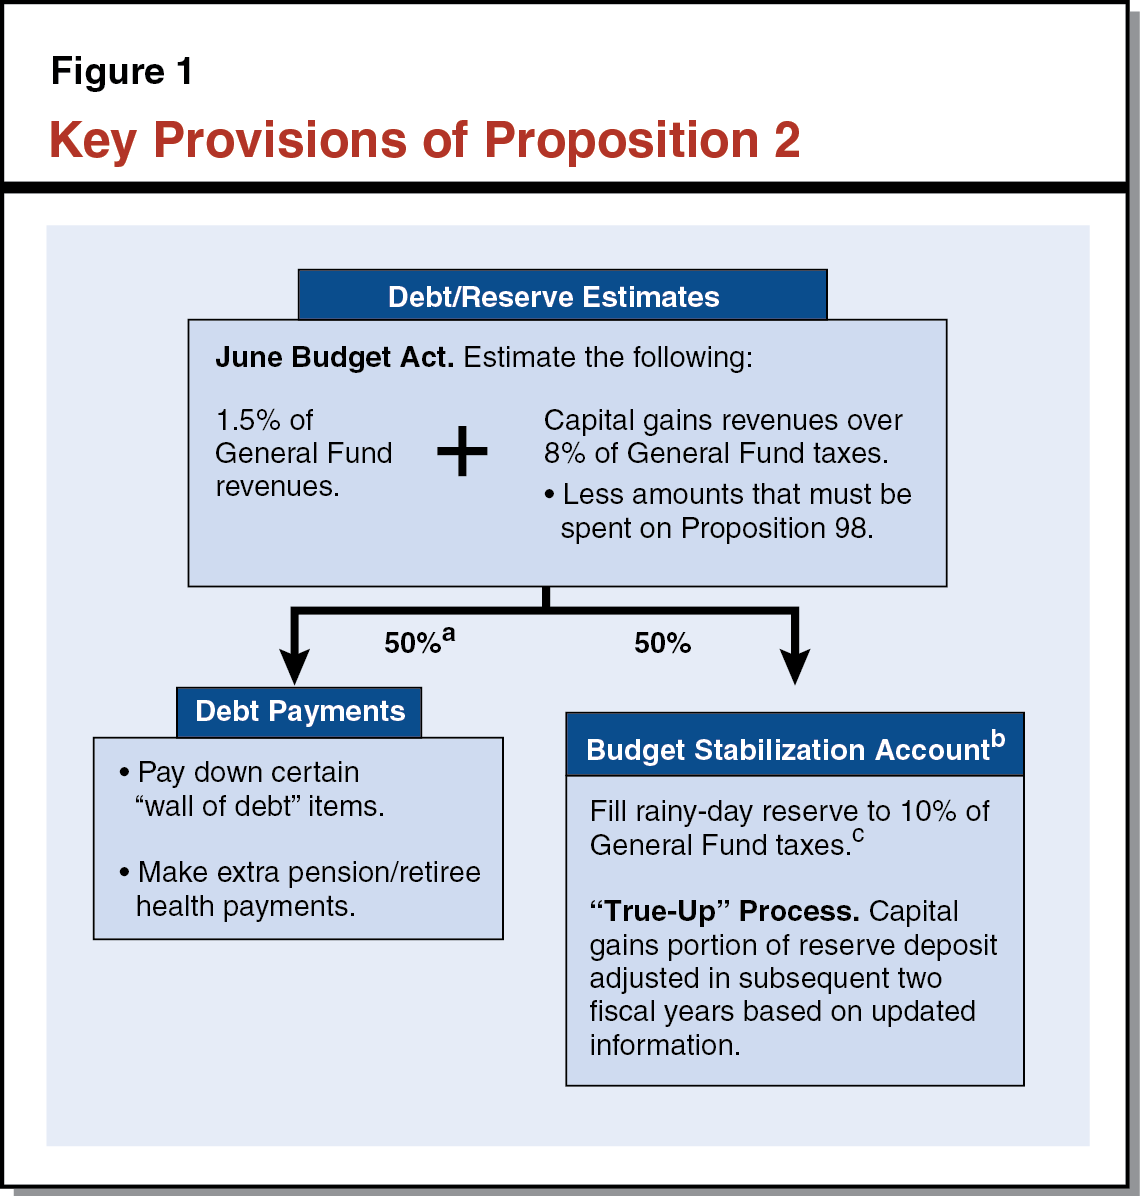 Figure 1 - Key Provisions of Proposition 2